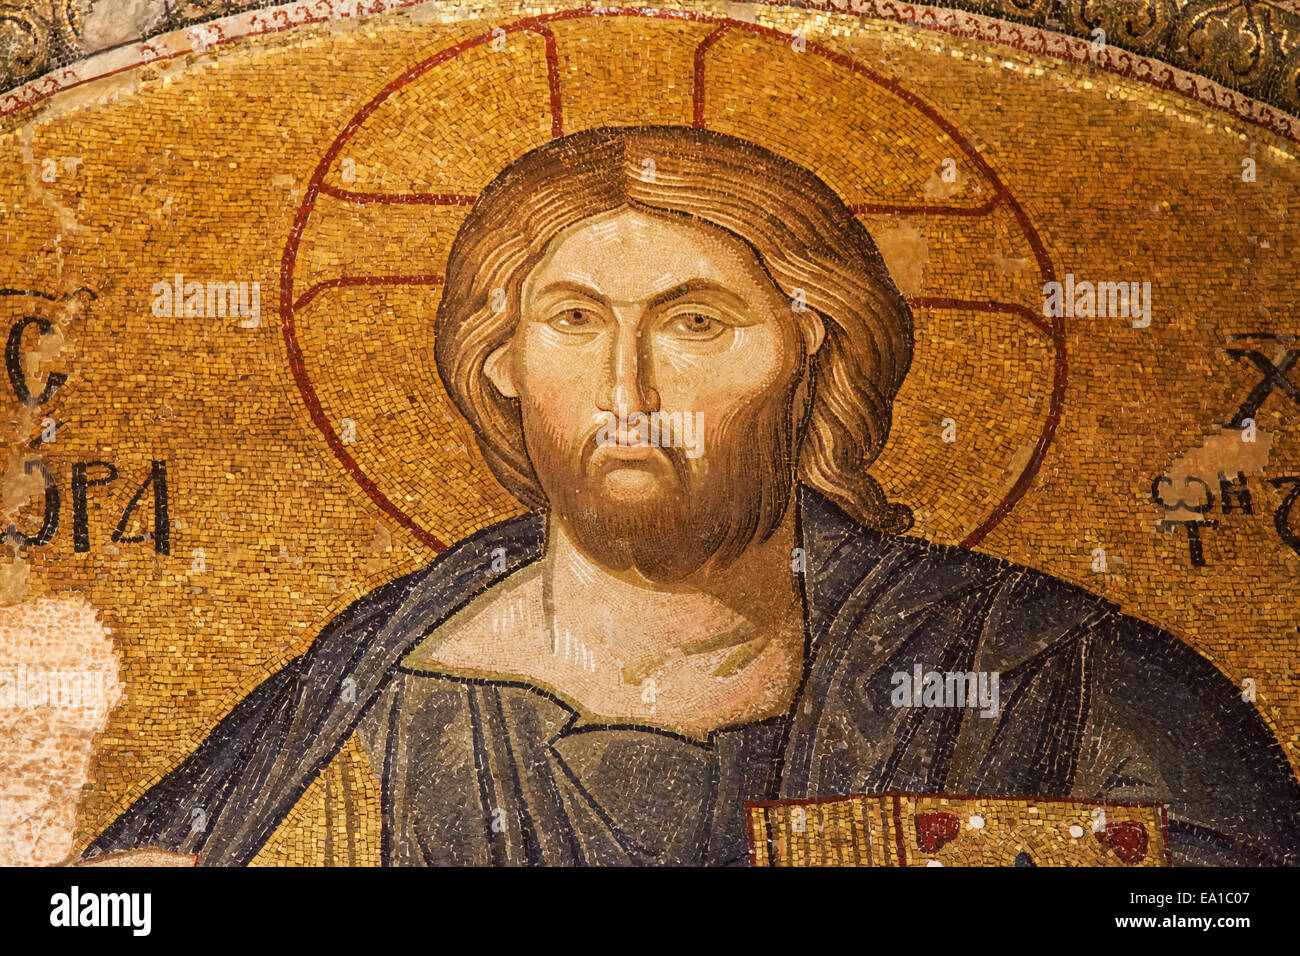 Christ Pantocrator mosaic in the Tympanon between Exonarthex and Narthex of the Chora Church, Istanbul, Turkey. Stock Photo